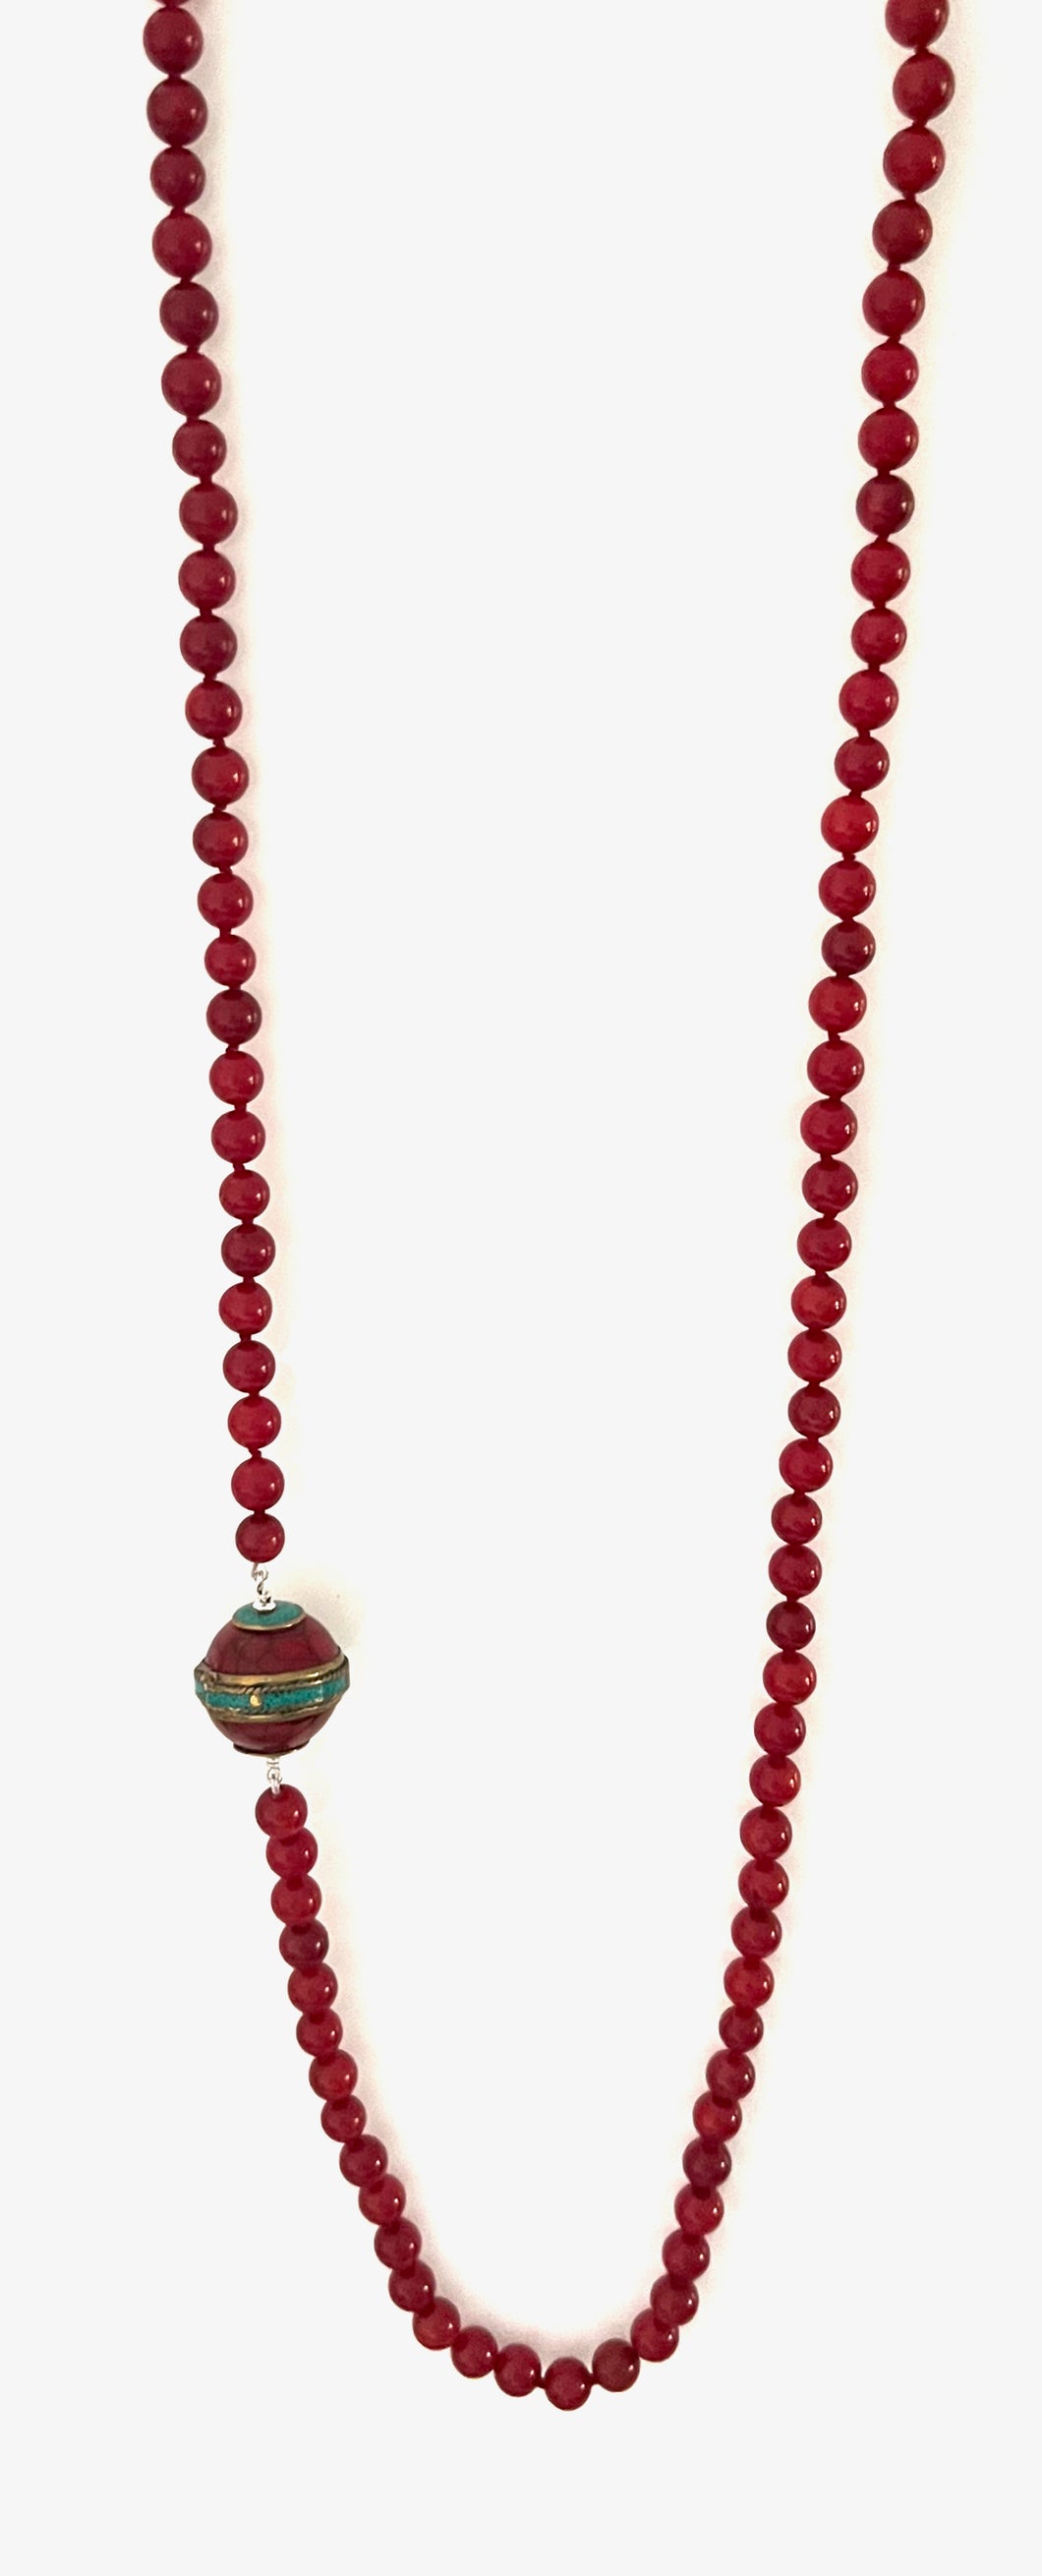 Australian Handmade Red Coral Long Necklace with Tibetan Bead Feature